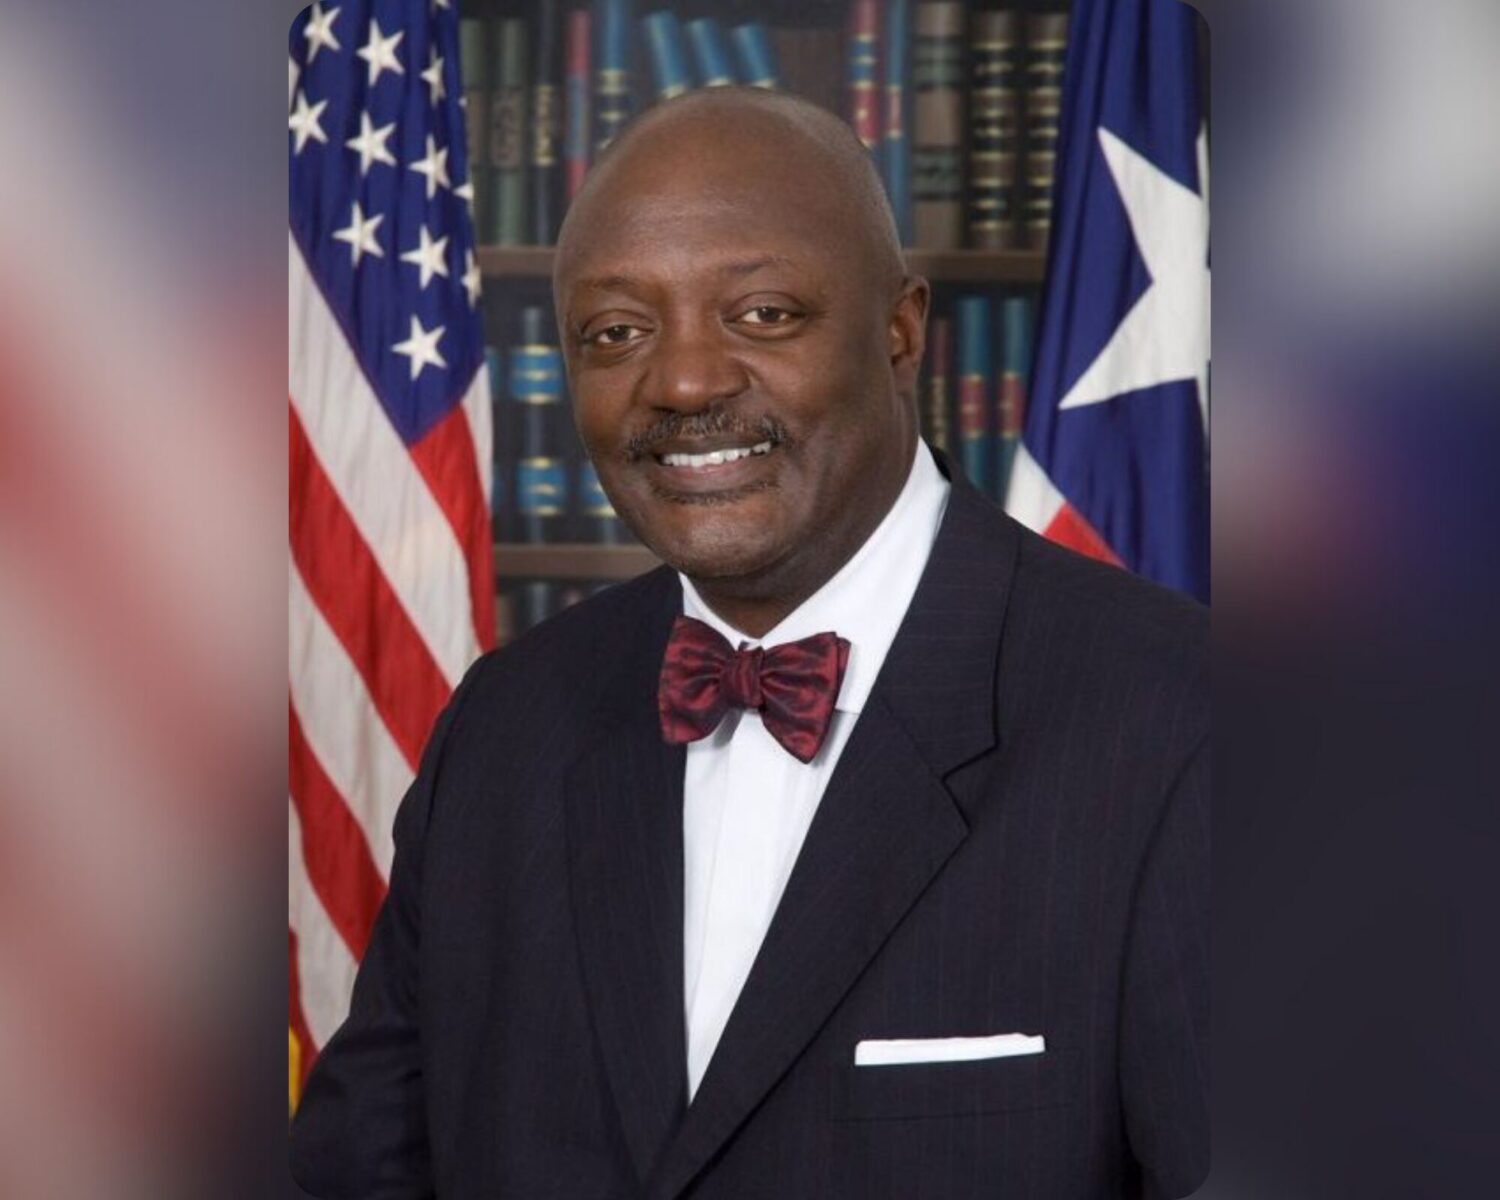 Judge Morris Overstreet, first African American elected to statewide office in Texas, dies at 73 | Houston Public Media